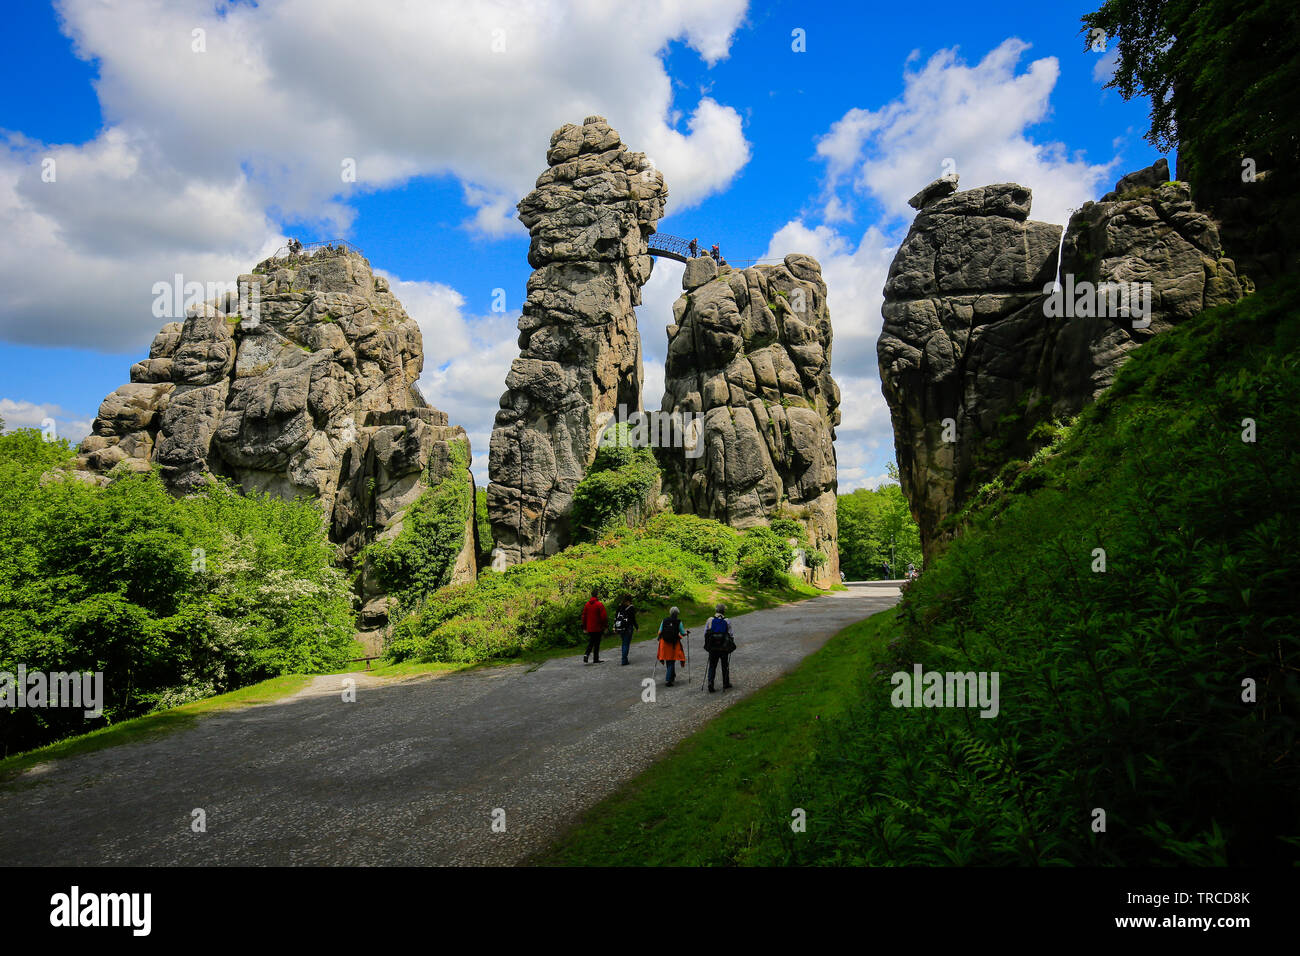 Horn-Bad Meinberg, Lipperland, North Rhine-Westphalia, Germany - Externsteine, a striking sandstone rock formation in the Teutoburg Forest and as such Stock Photo